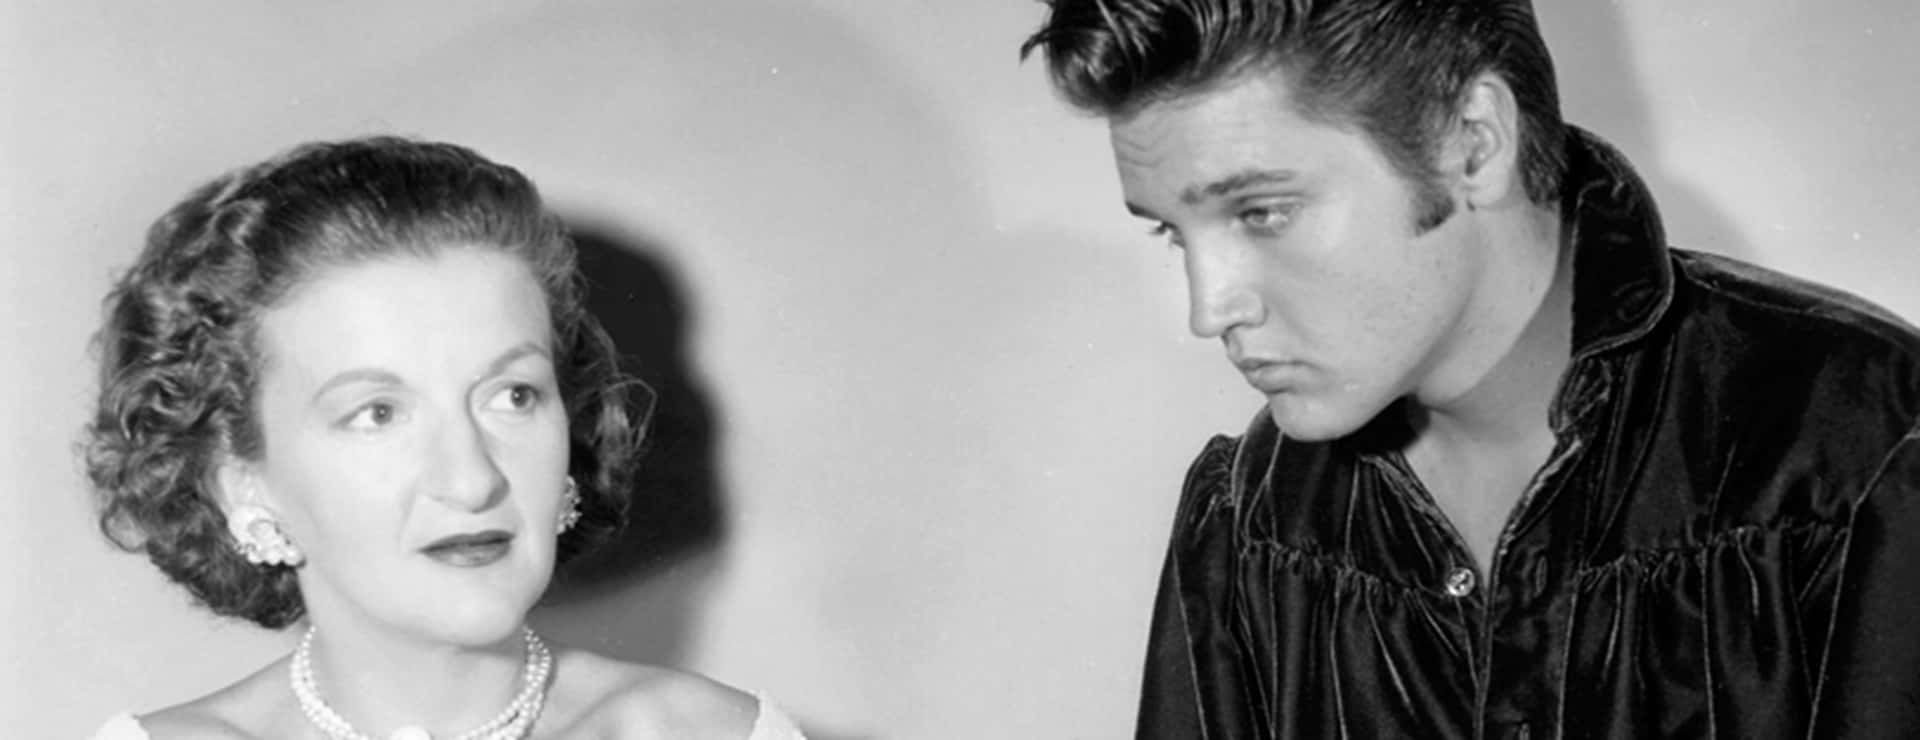 Elvis and the girl from Vienna